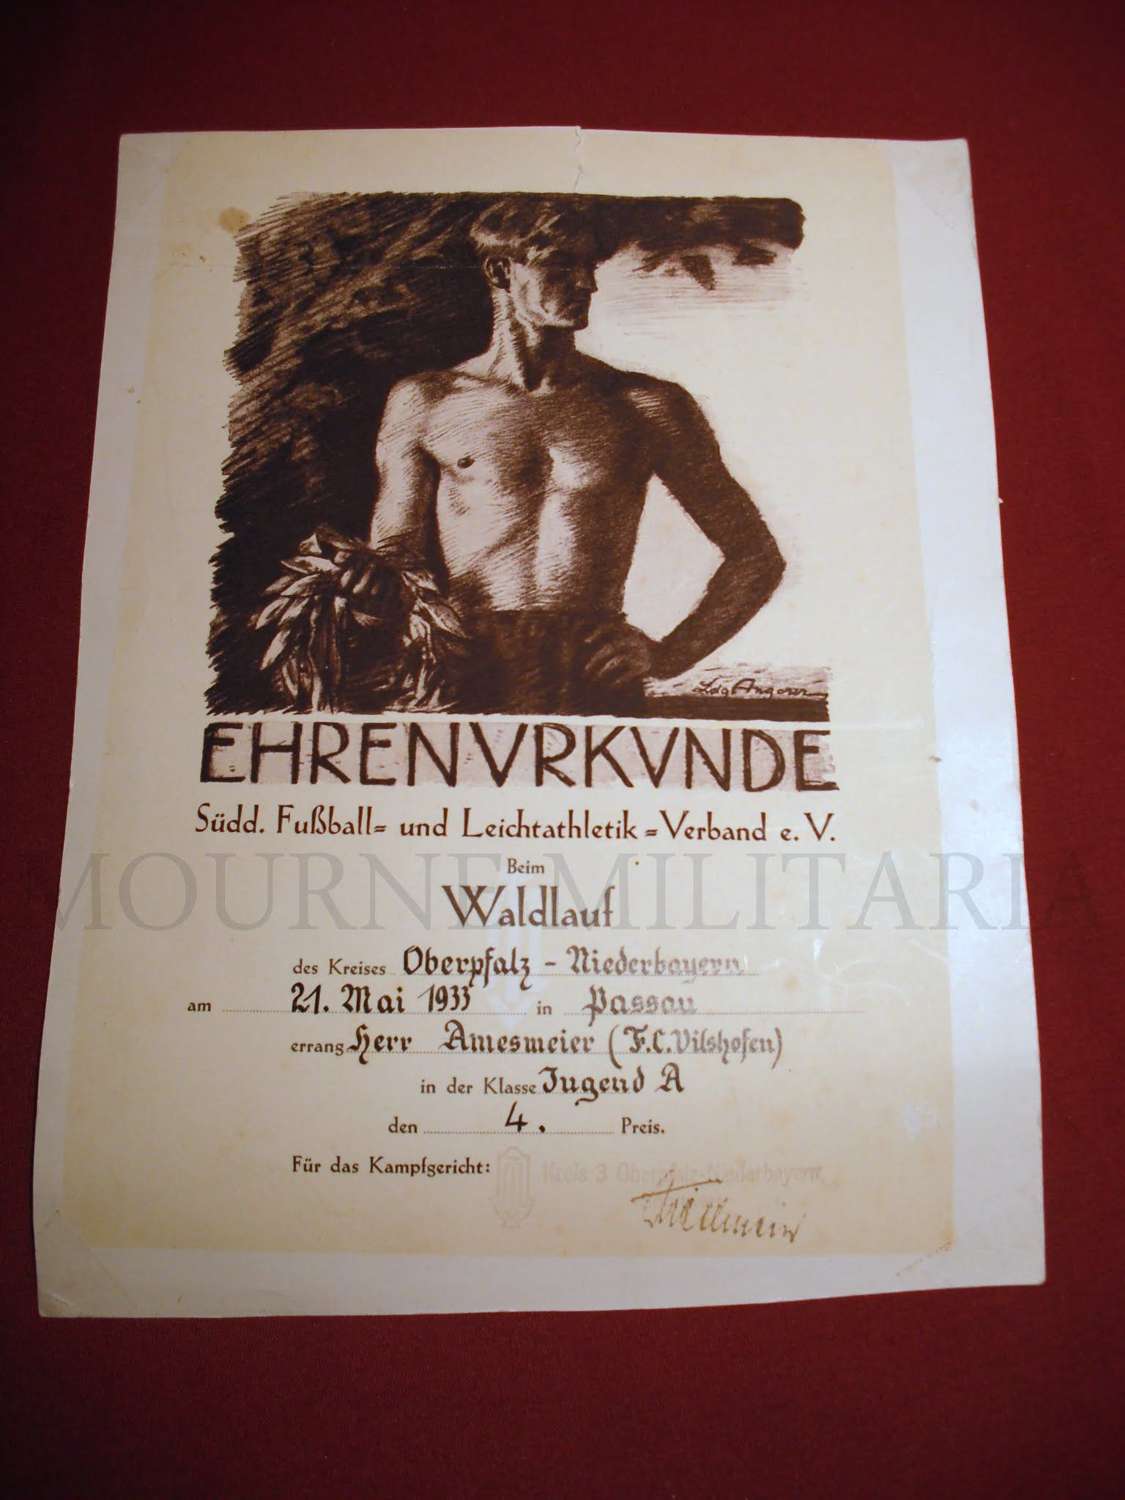 Reich Sports Certificate Dated May 1933